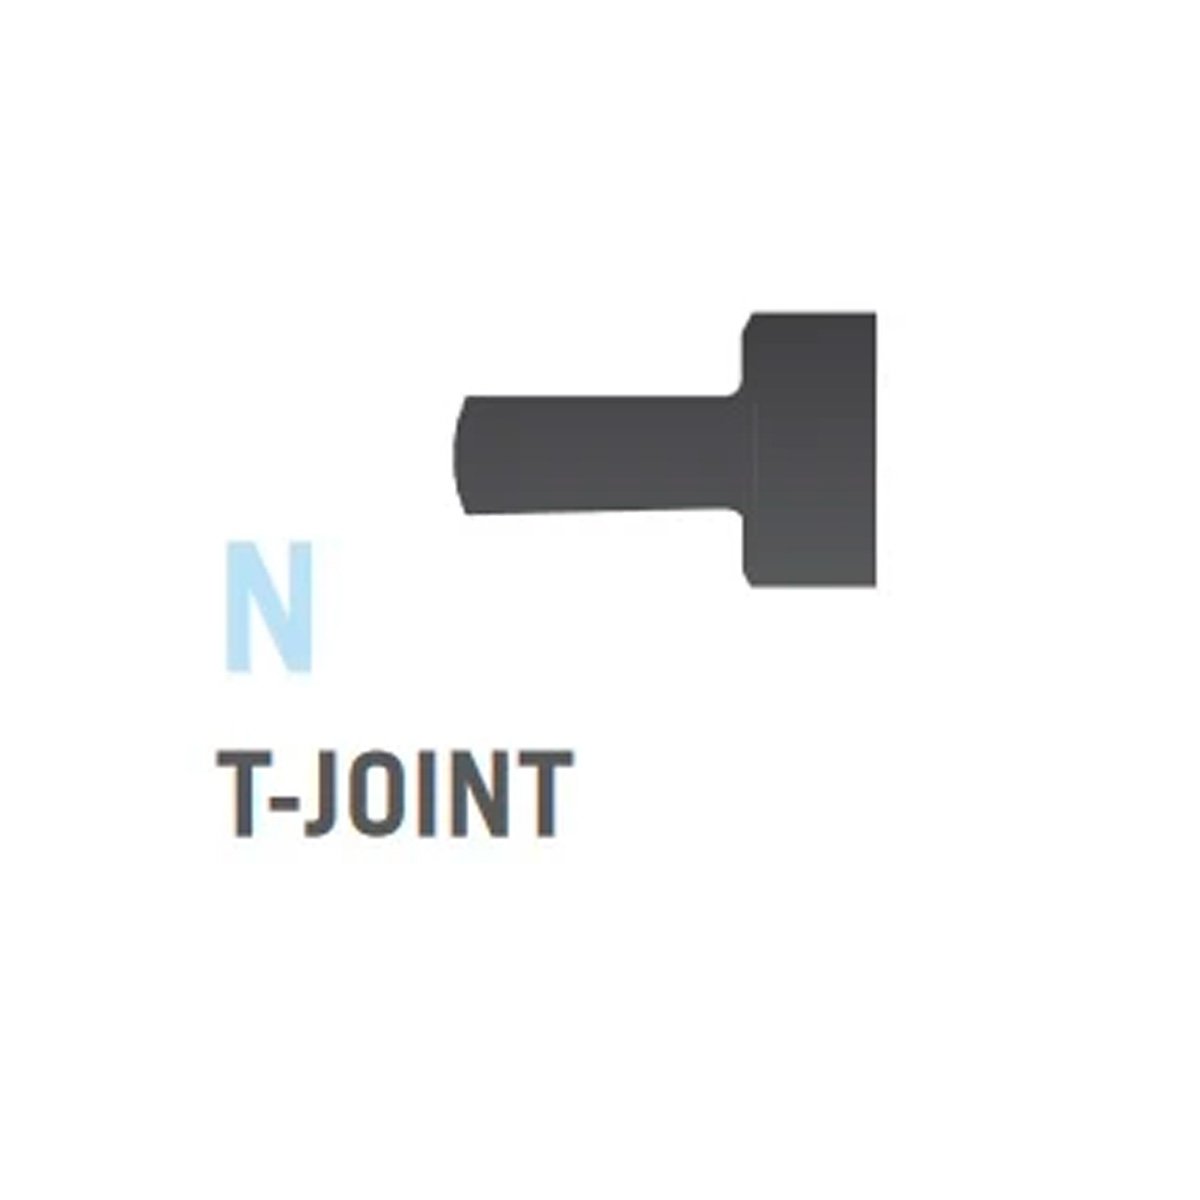 T-Joint for Stratos & Cirrus Trampolines (Part N).